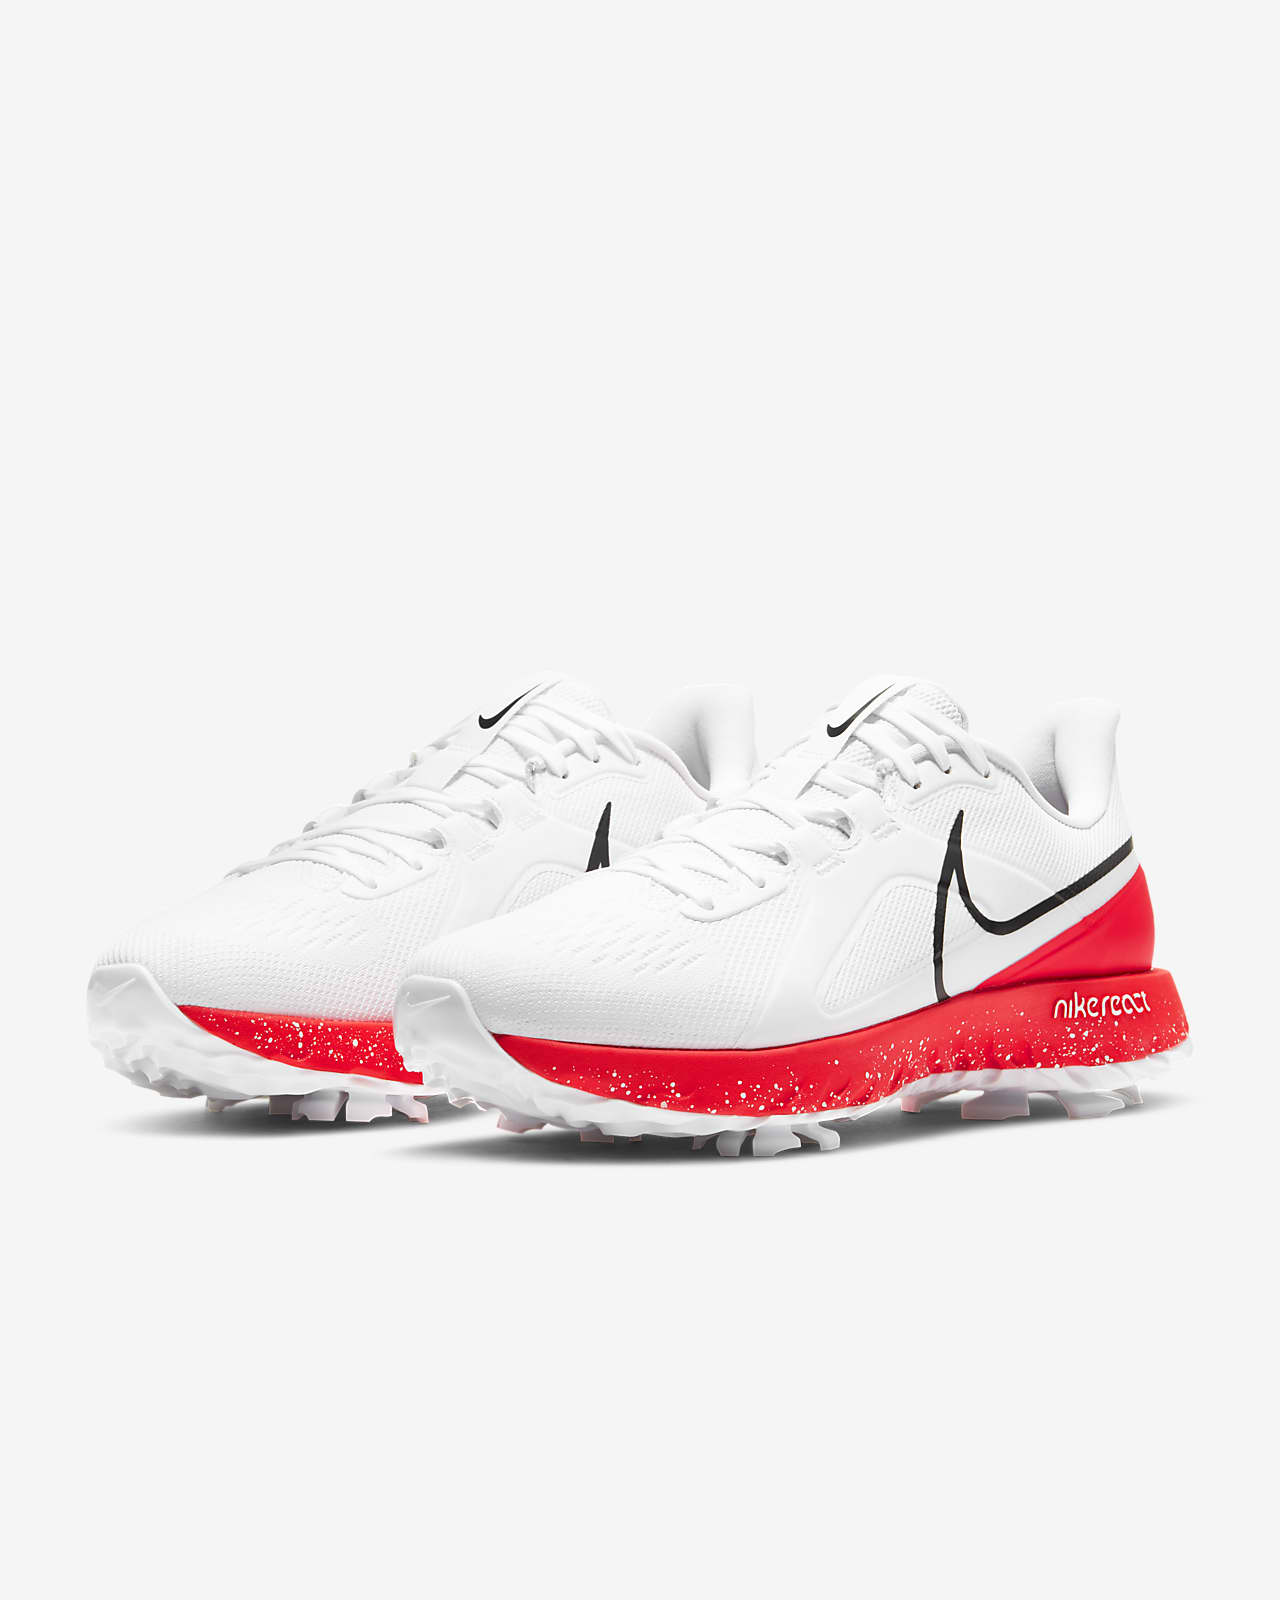 Nike React Infinity Pro Golf Shoes (Wide)